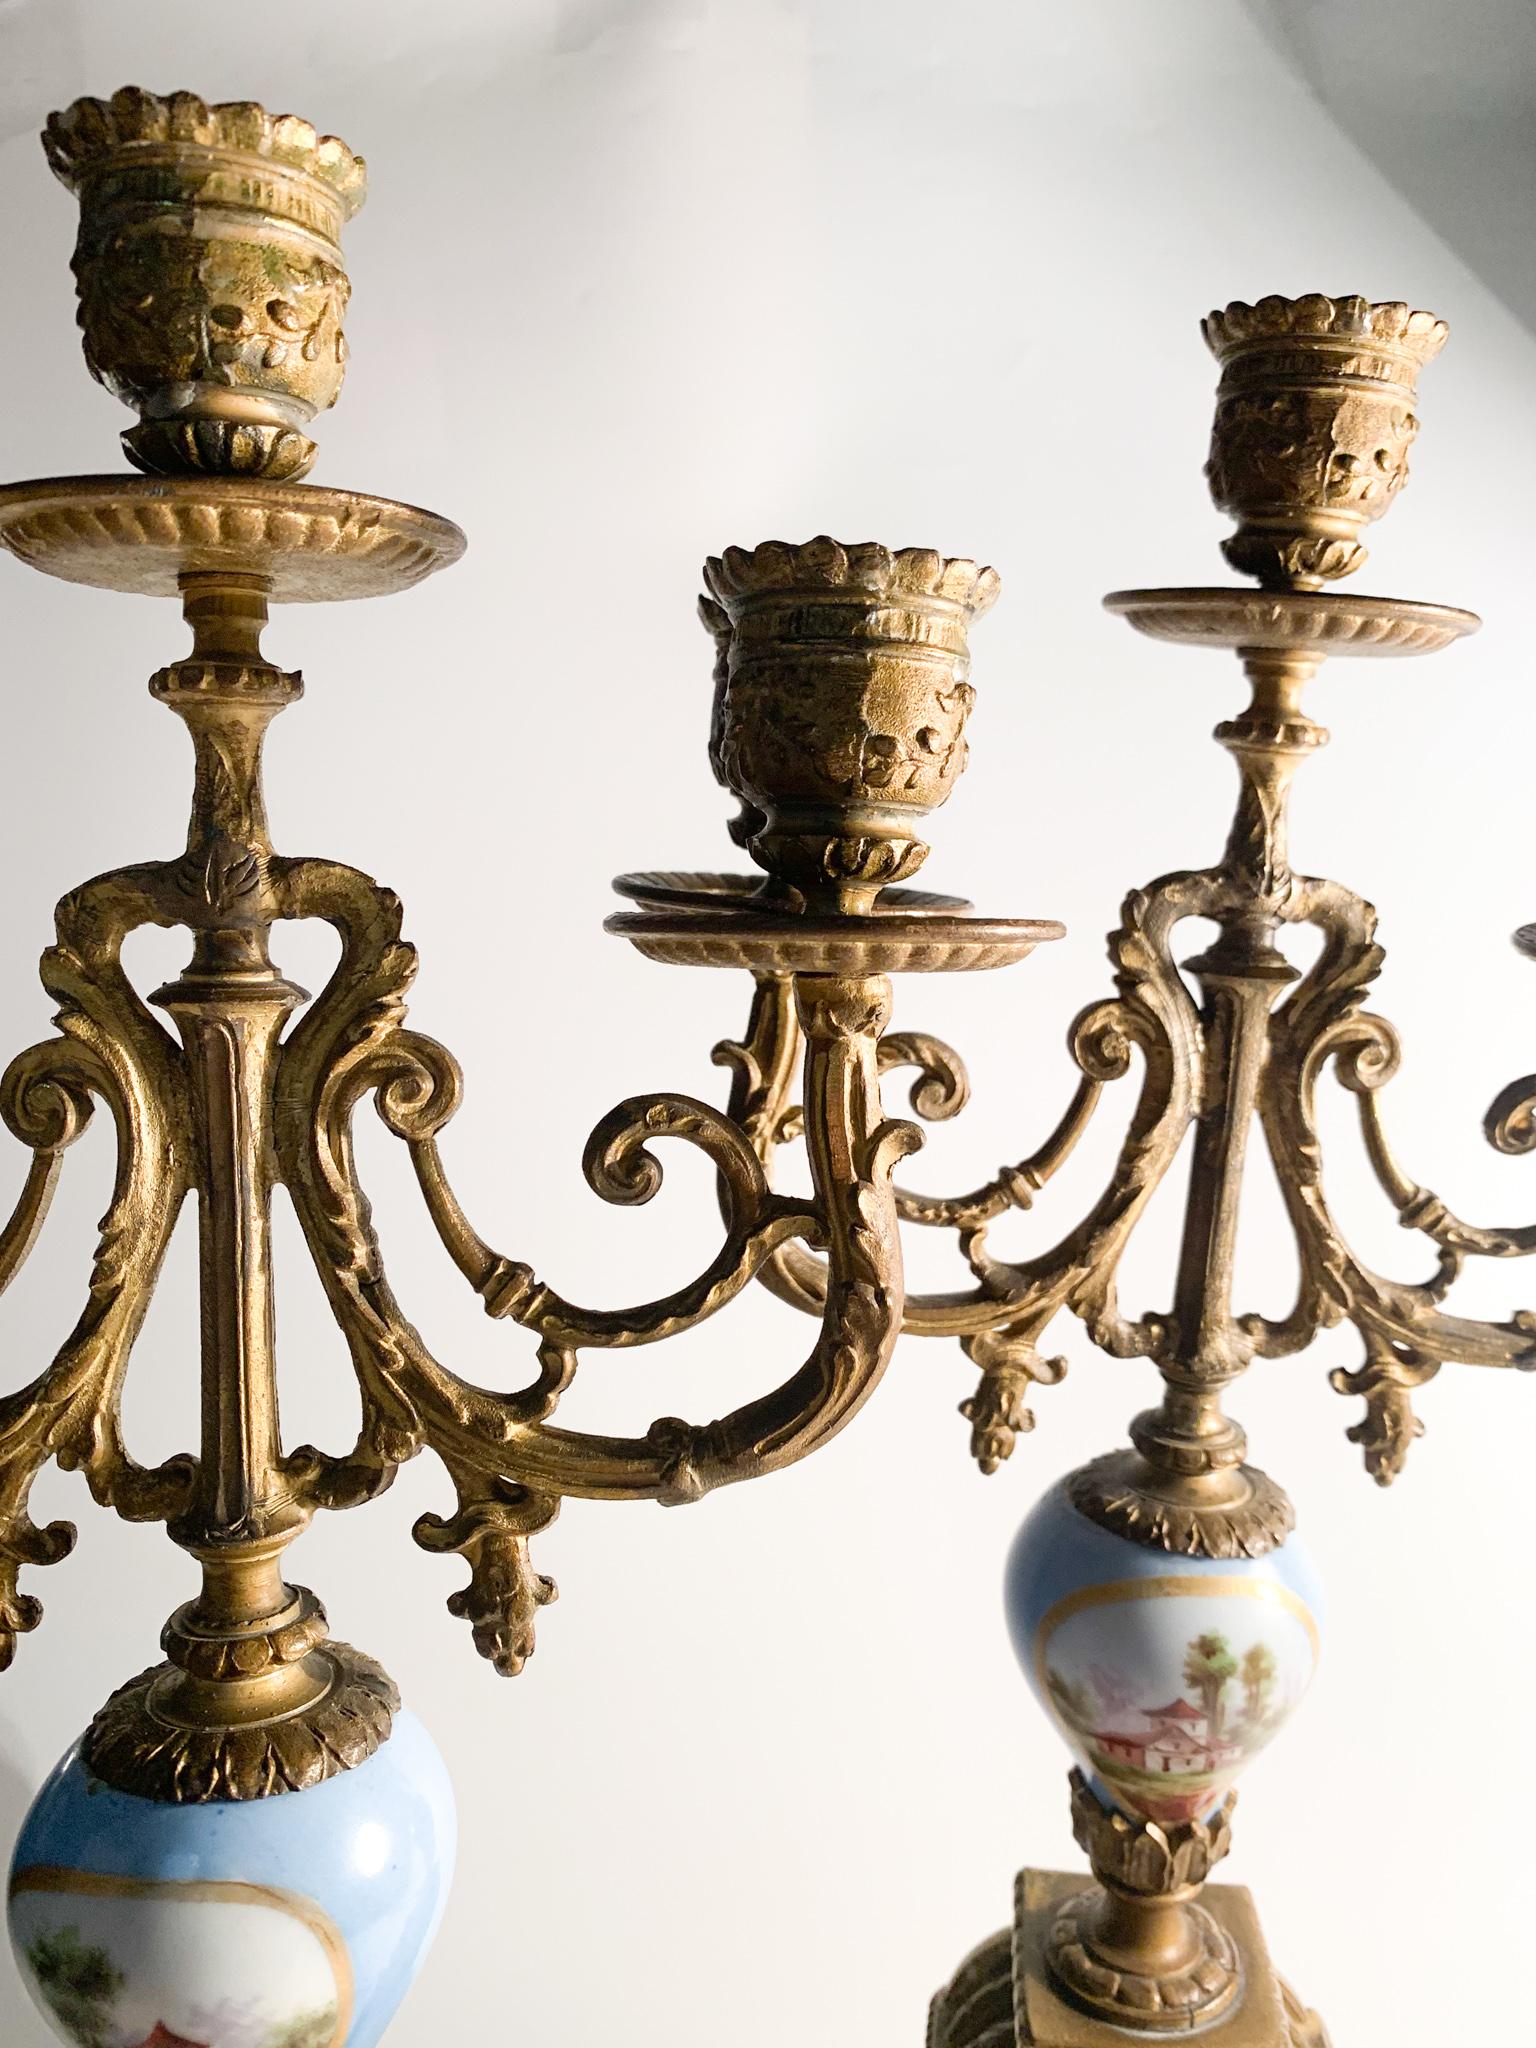 French Pair of Limoges Empire Candelabra in Bronze and Porcelain from the 1800s